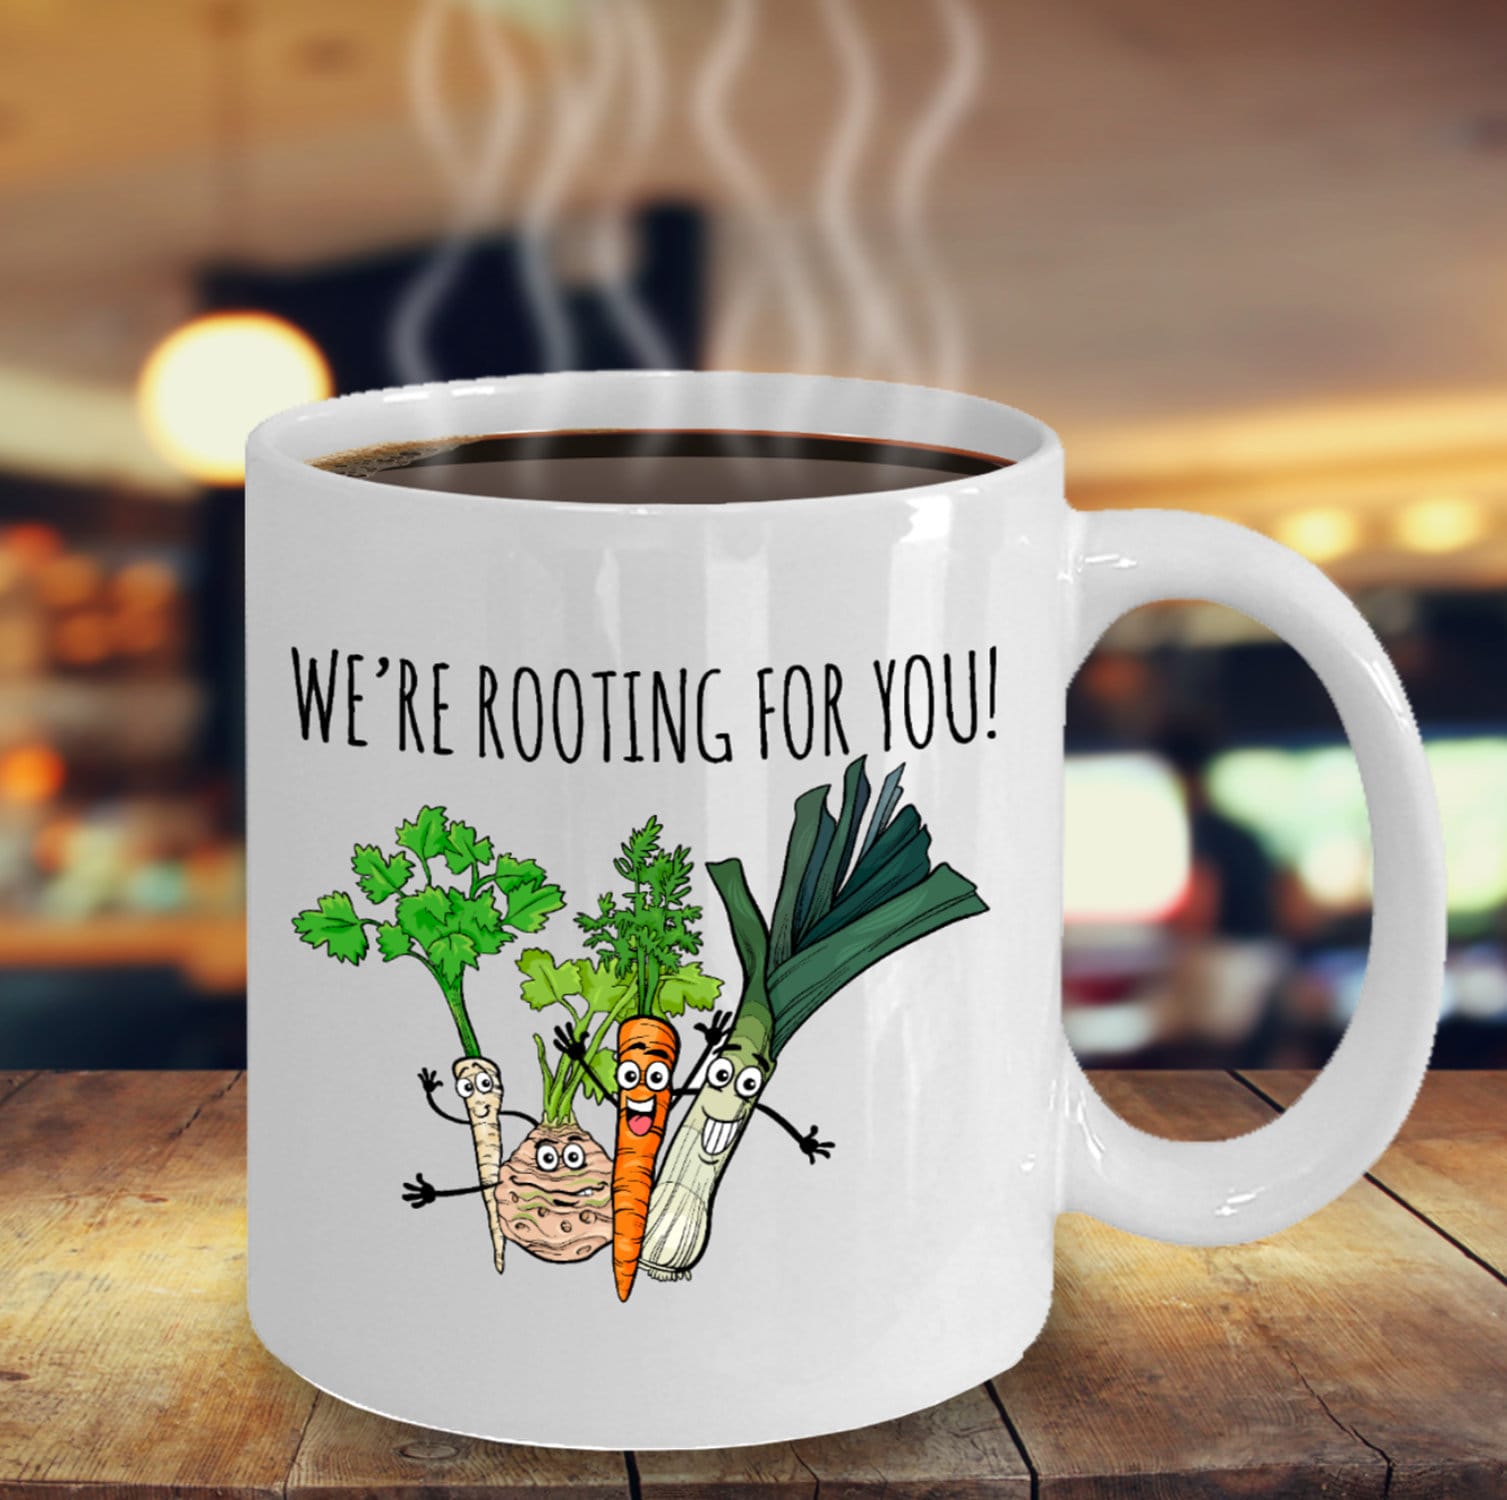 Rooting for You Veggie Coffee Mug Motivational Ceramic Microwave and Dishwasher Safe Cup 